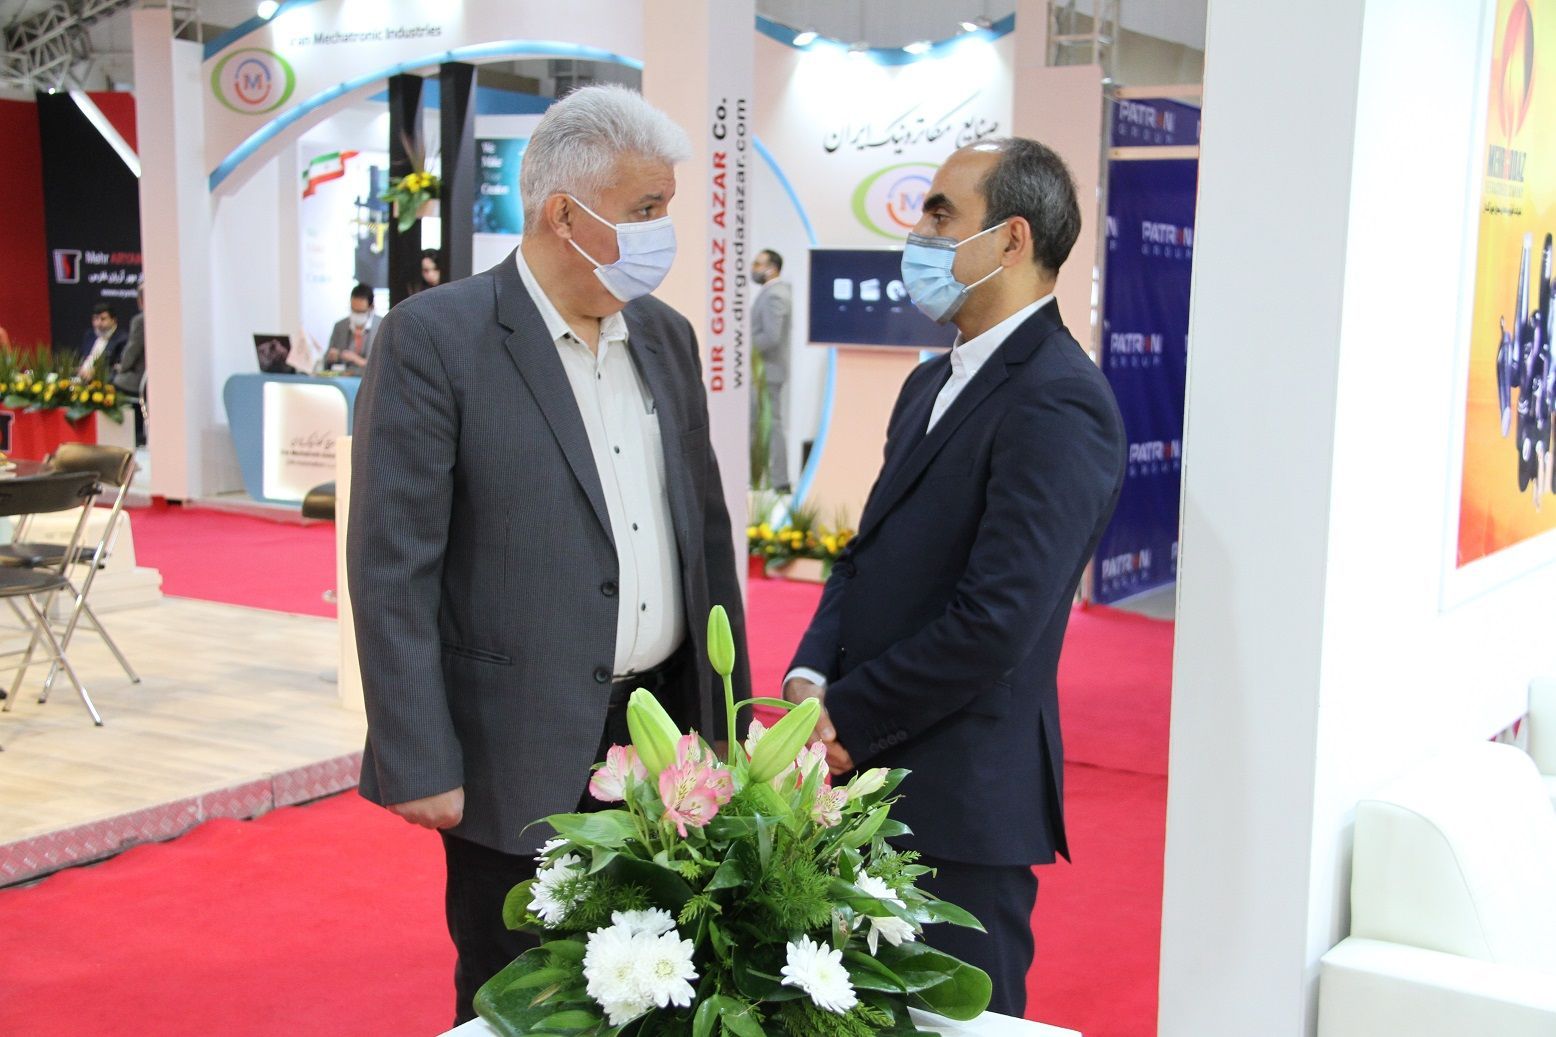 IMG 1302 - The participation of Mehrgodaz refractories company in the sixth refractory exhibition